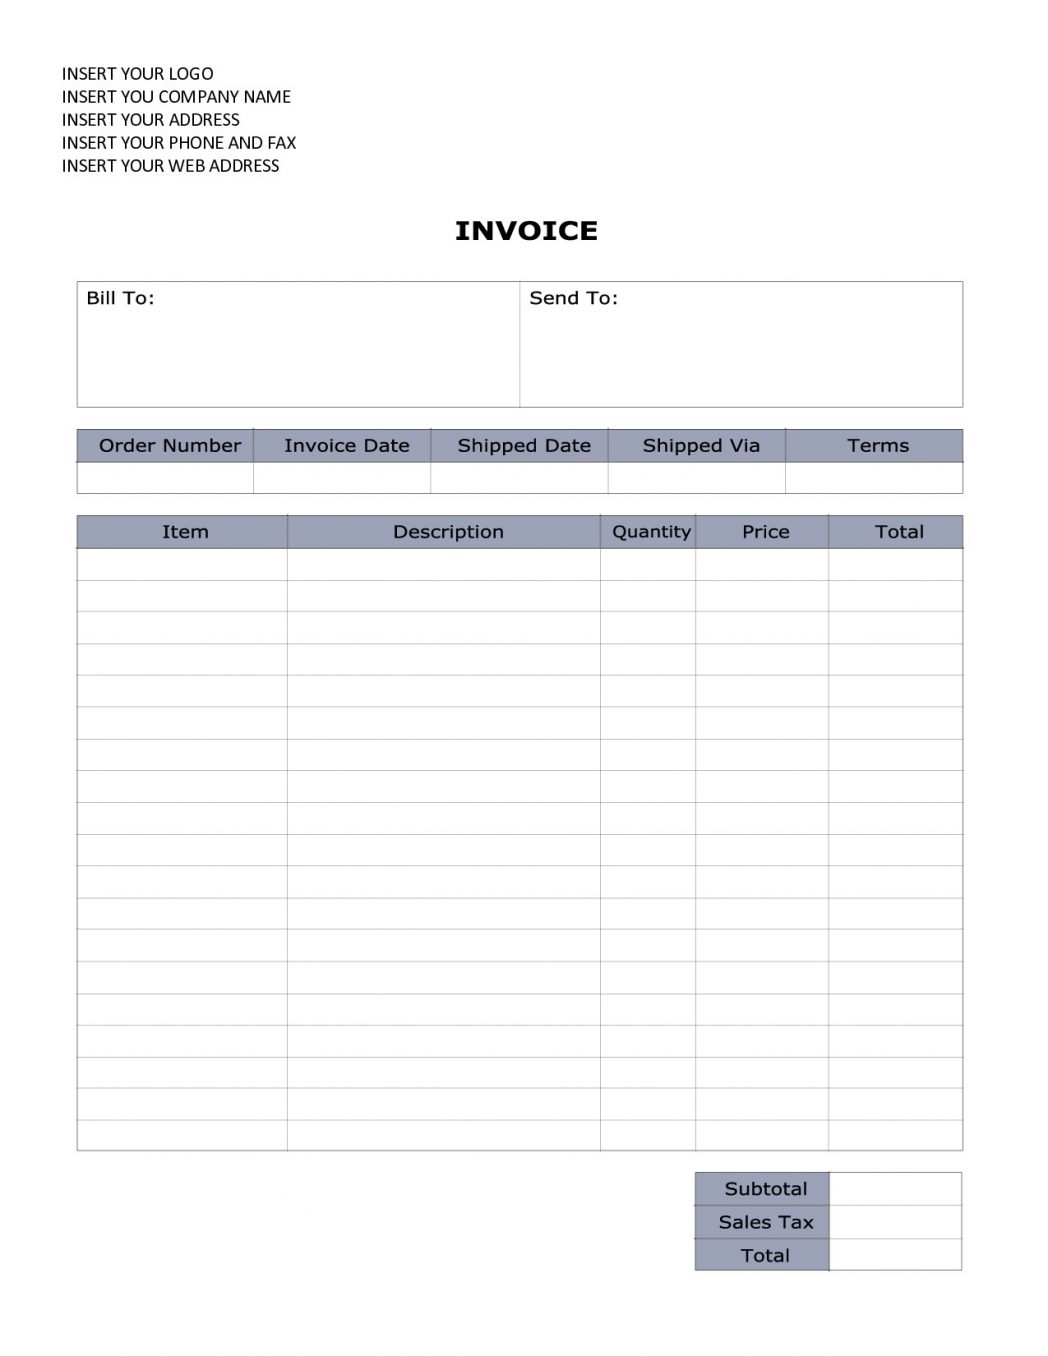 contractor invoice template template mbbtrafo sample invoice in word format